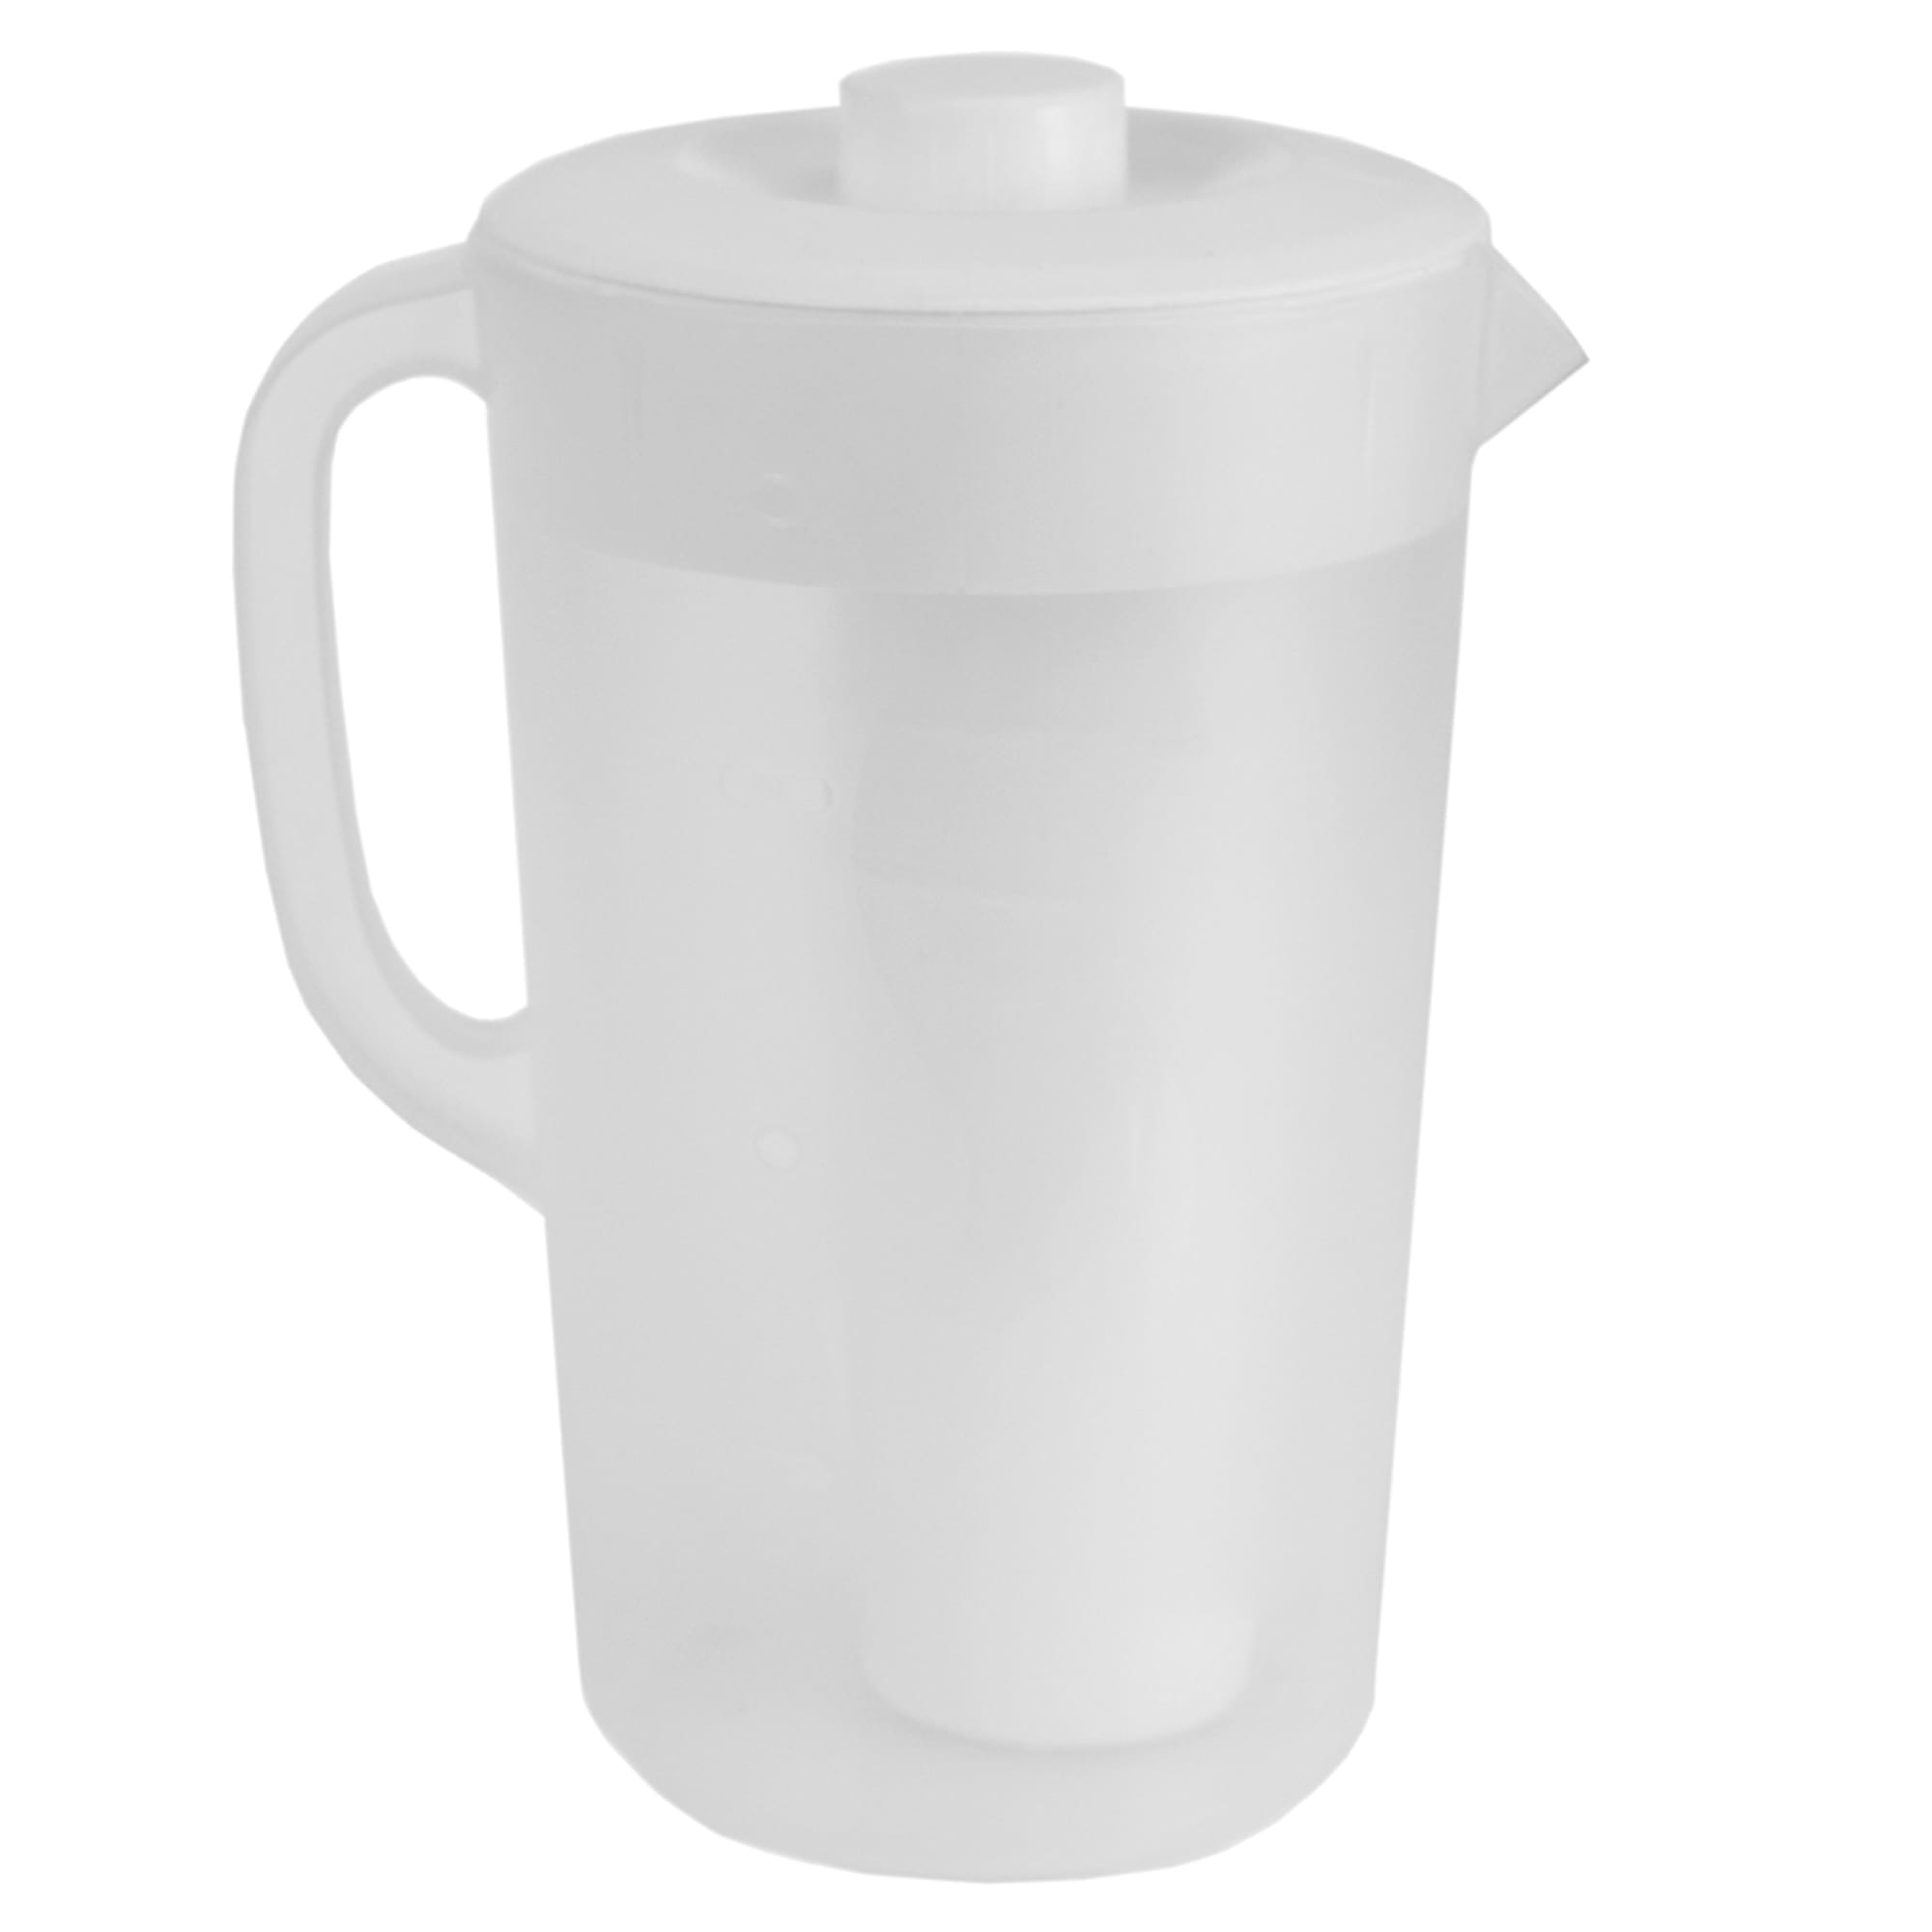 Home Basics 2 LT Classic Plastic Pitcher with Four Tumblers, White $5.00 EACH, CASE PACK OF 6